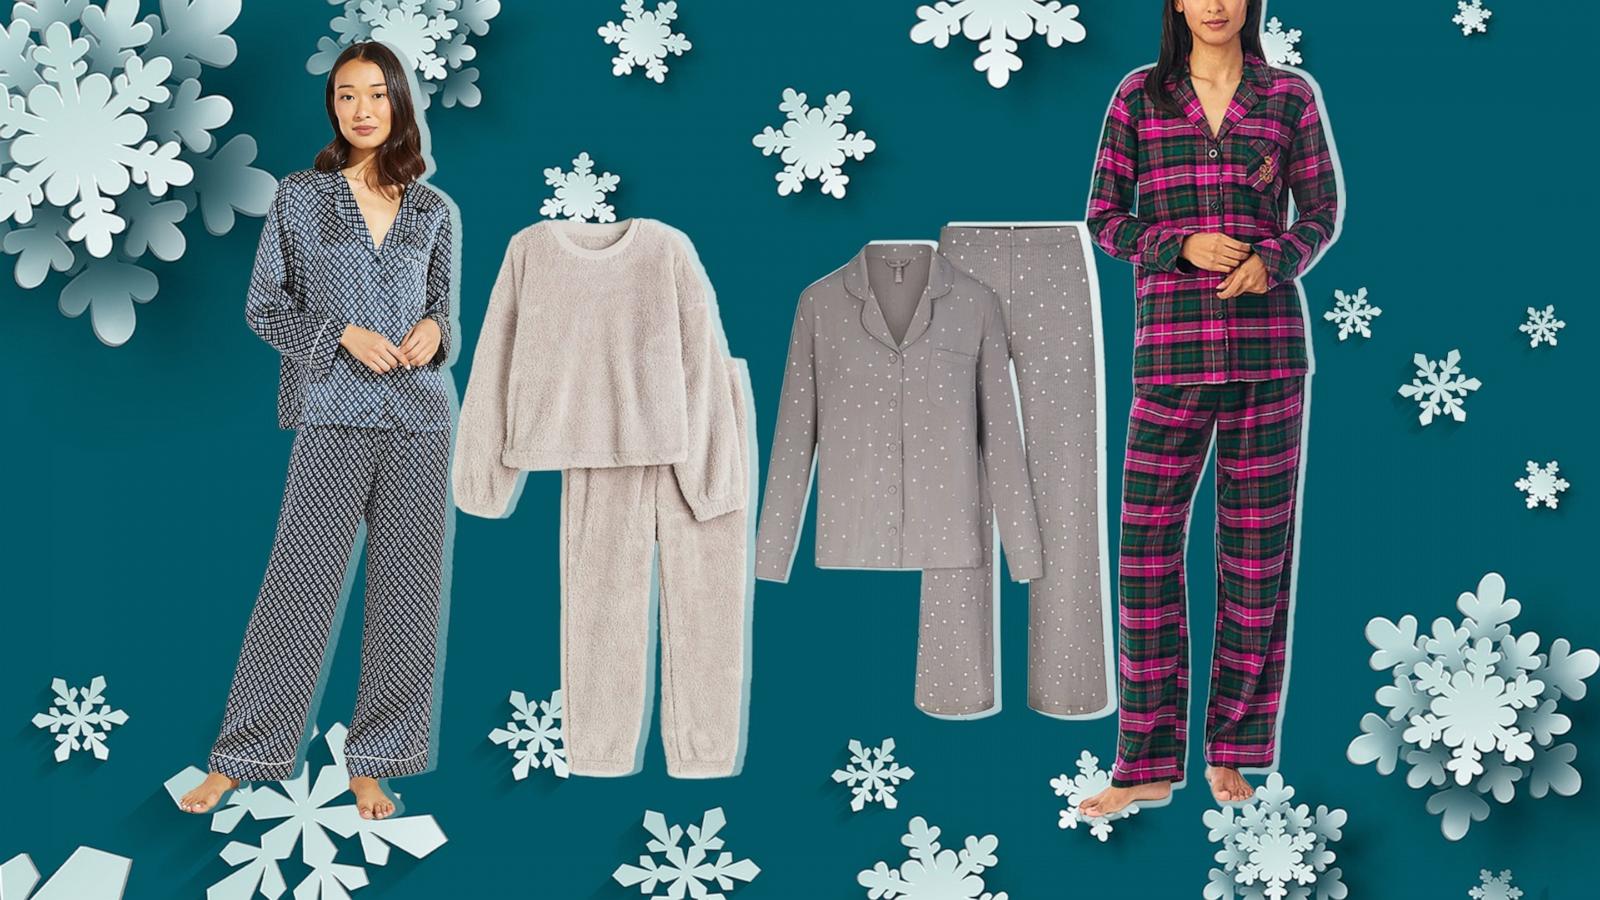 Pajama Set Review: The Perfect Sleepwear for Comfort and Style